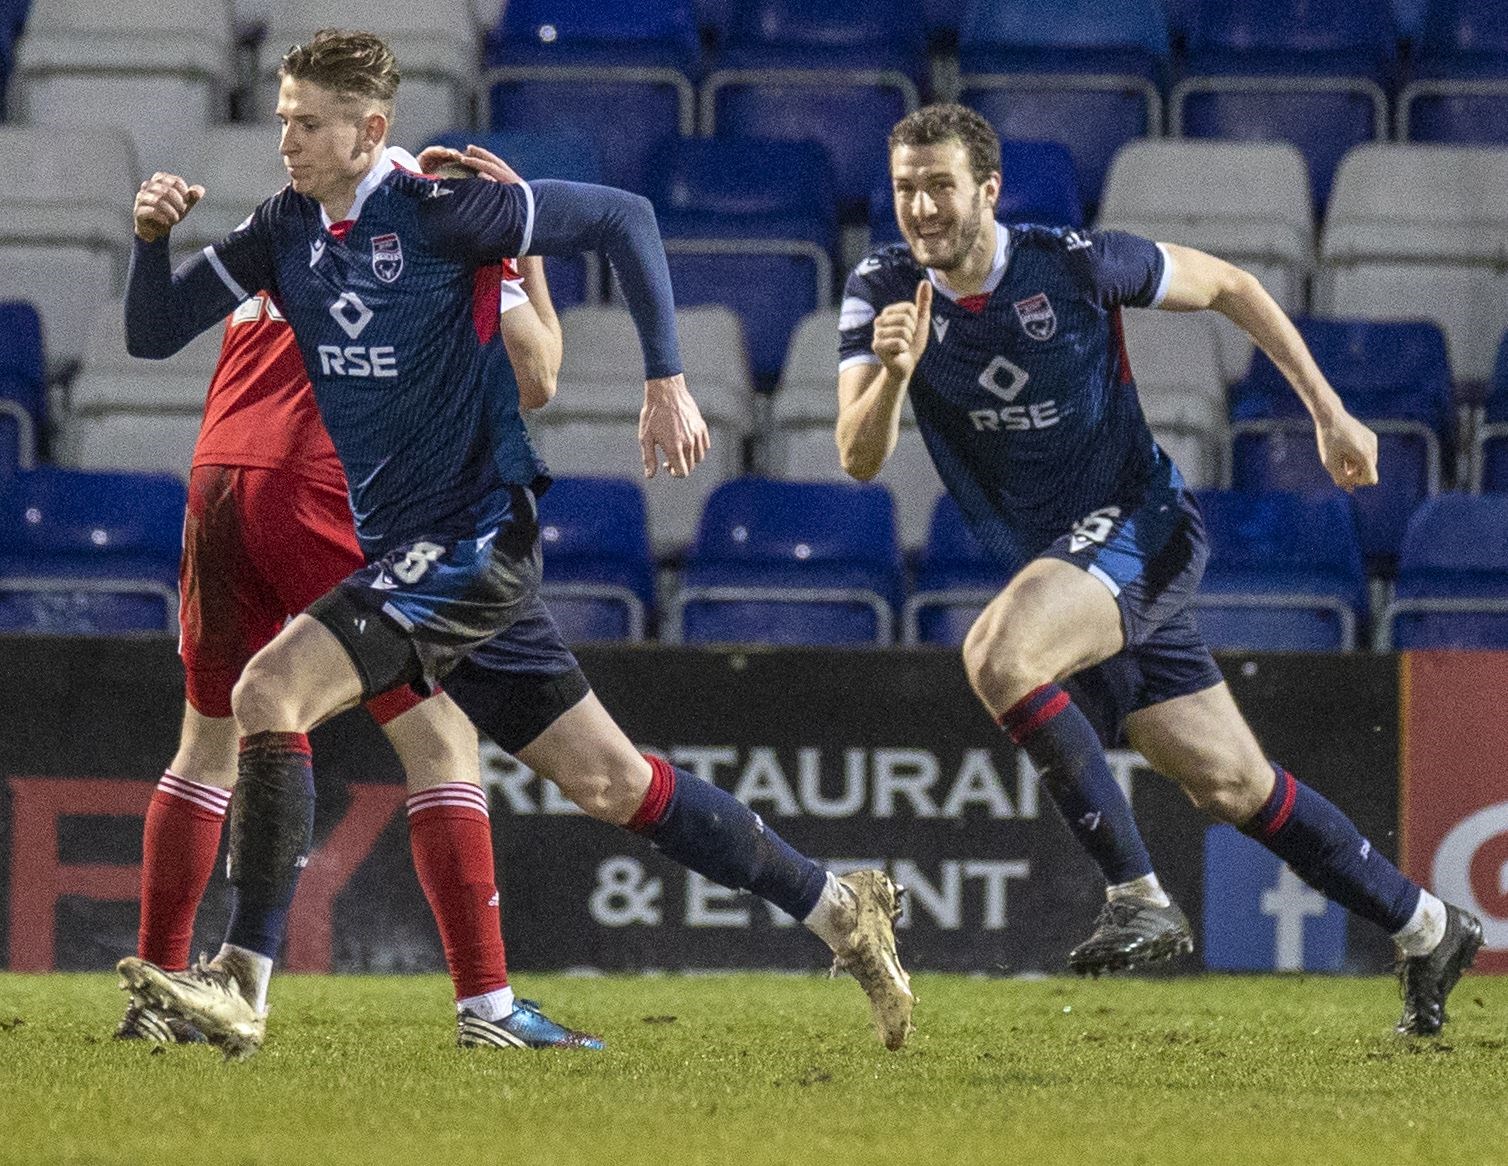 Picture - Ken Macpherson, Inverness. Ross County(4) v Aberdeen(1). 16.01.21. Ross County's Oli Shaw celebrates his 2nd goal.